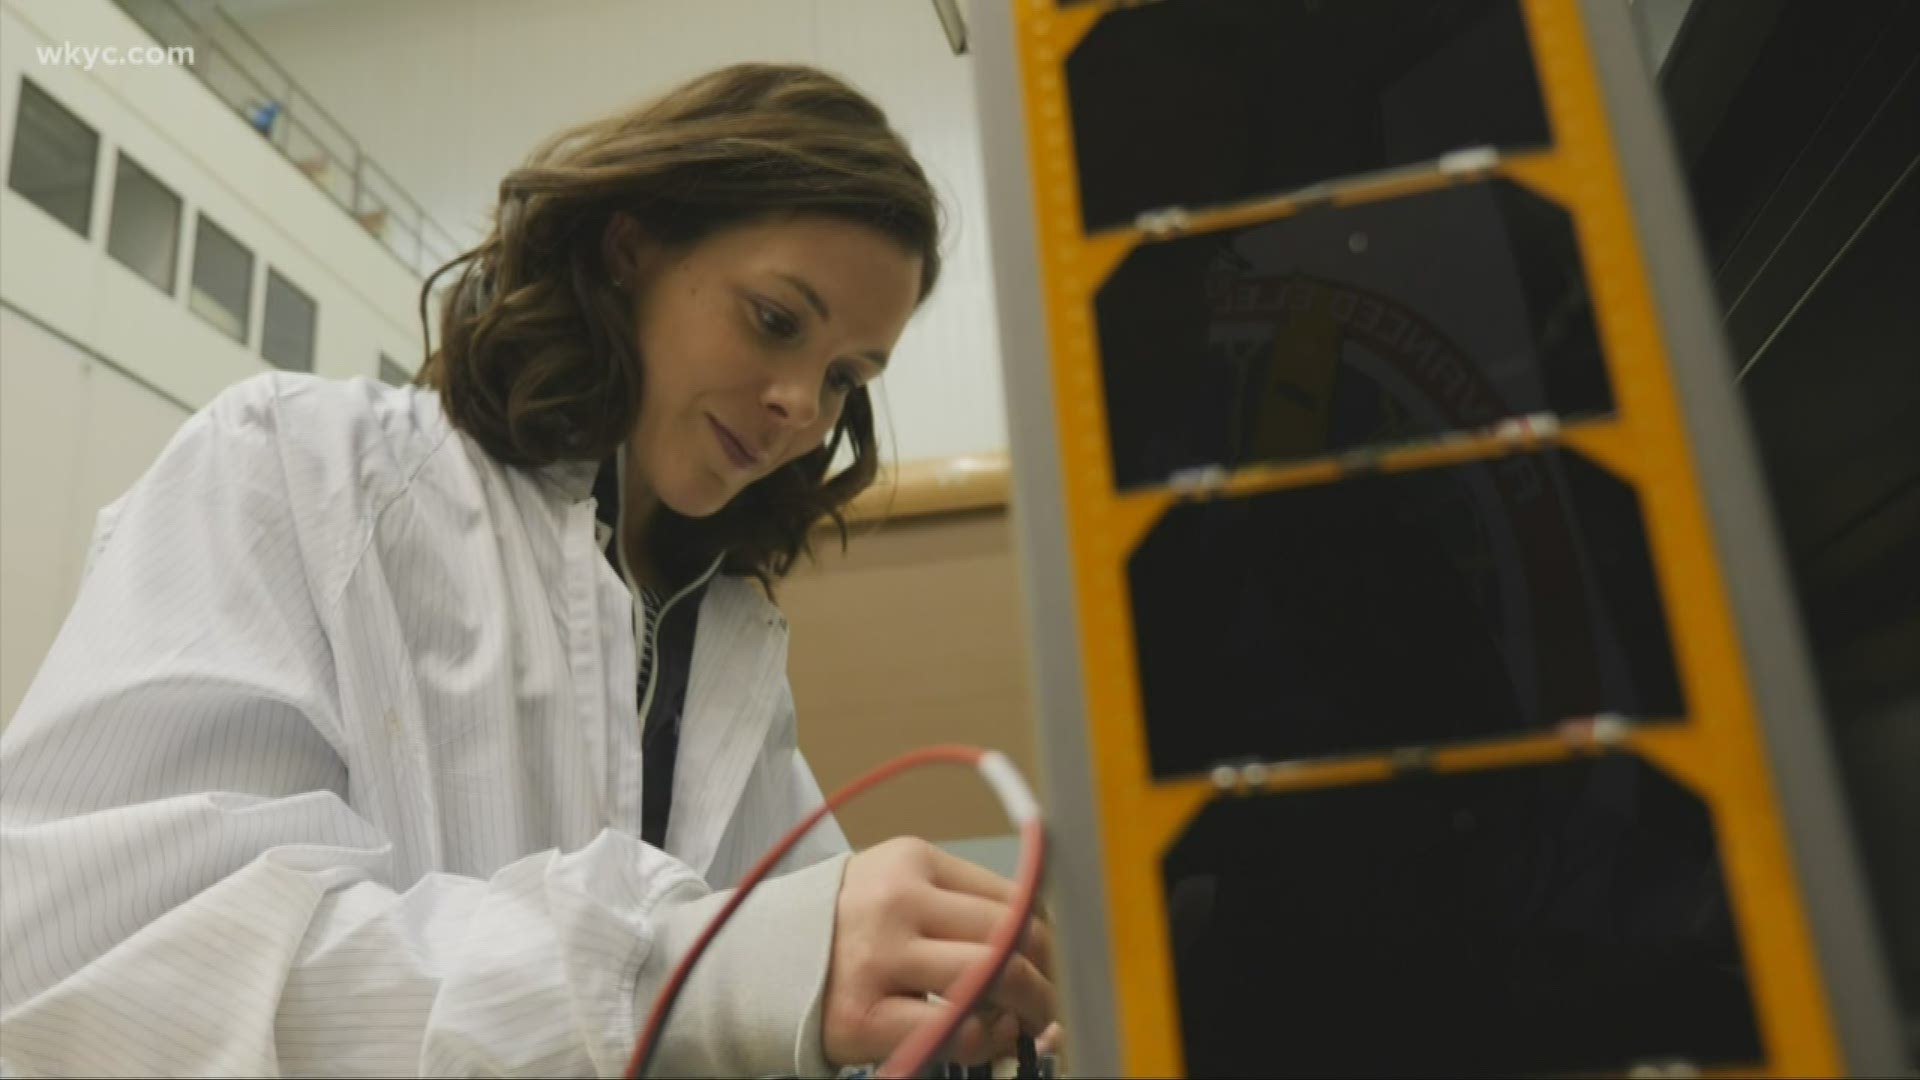 NASA engineers and scientists are putting the Orion spacecraft through testing at its Plum Brook facility in Sandusky. We profile one of the women on the project.